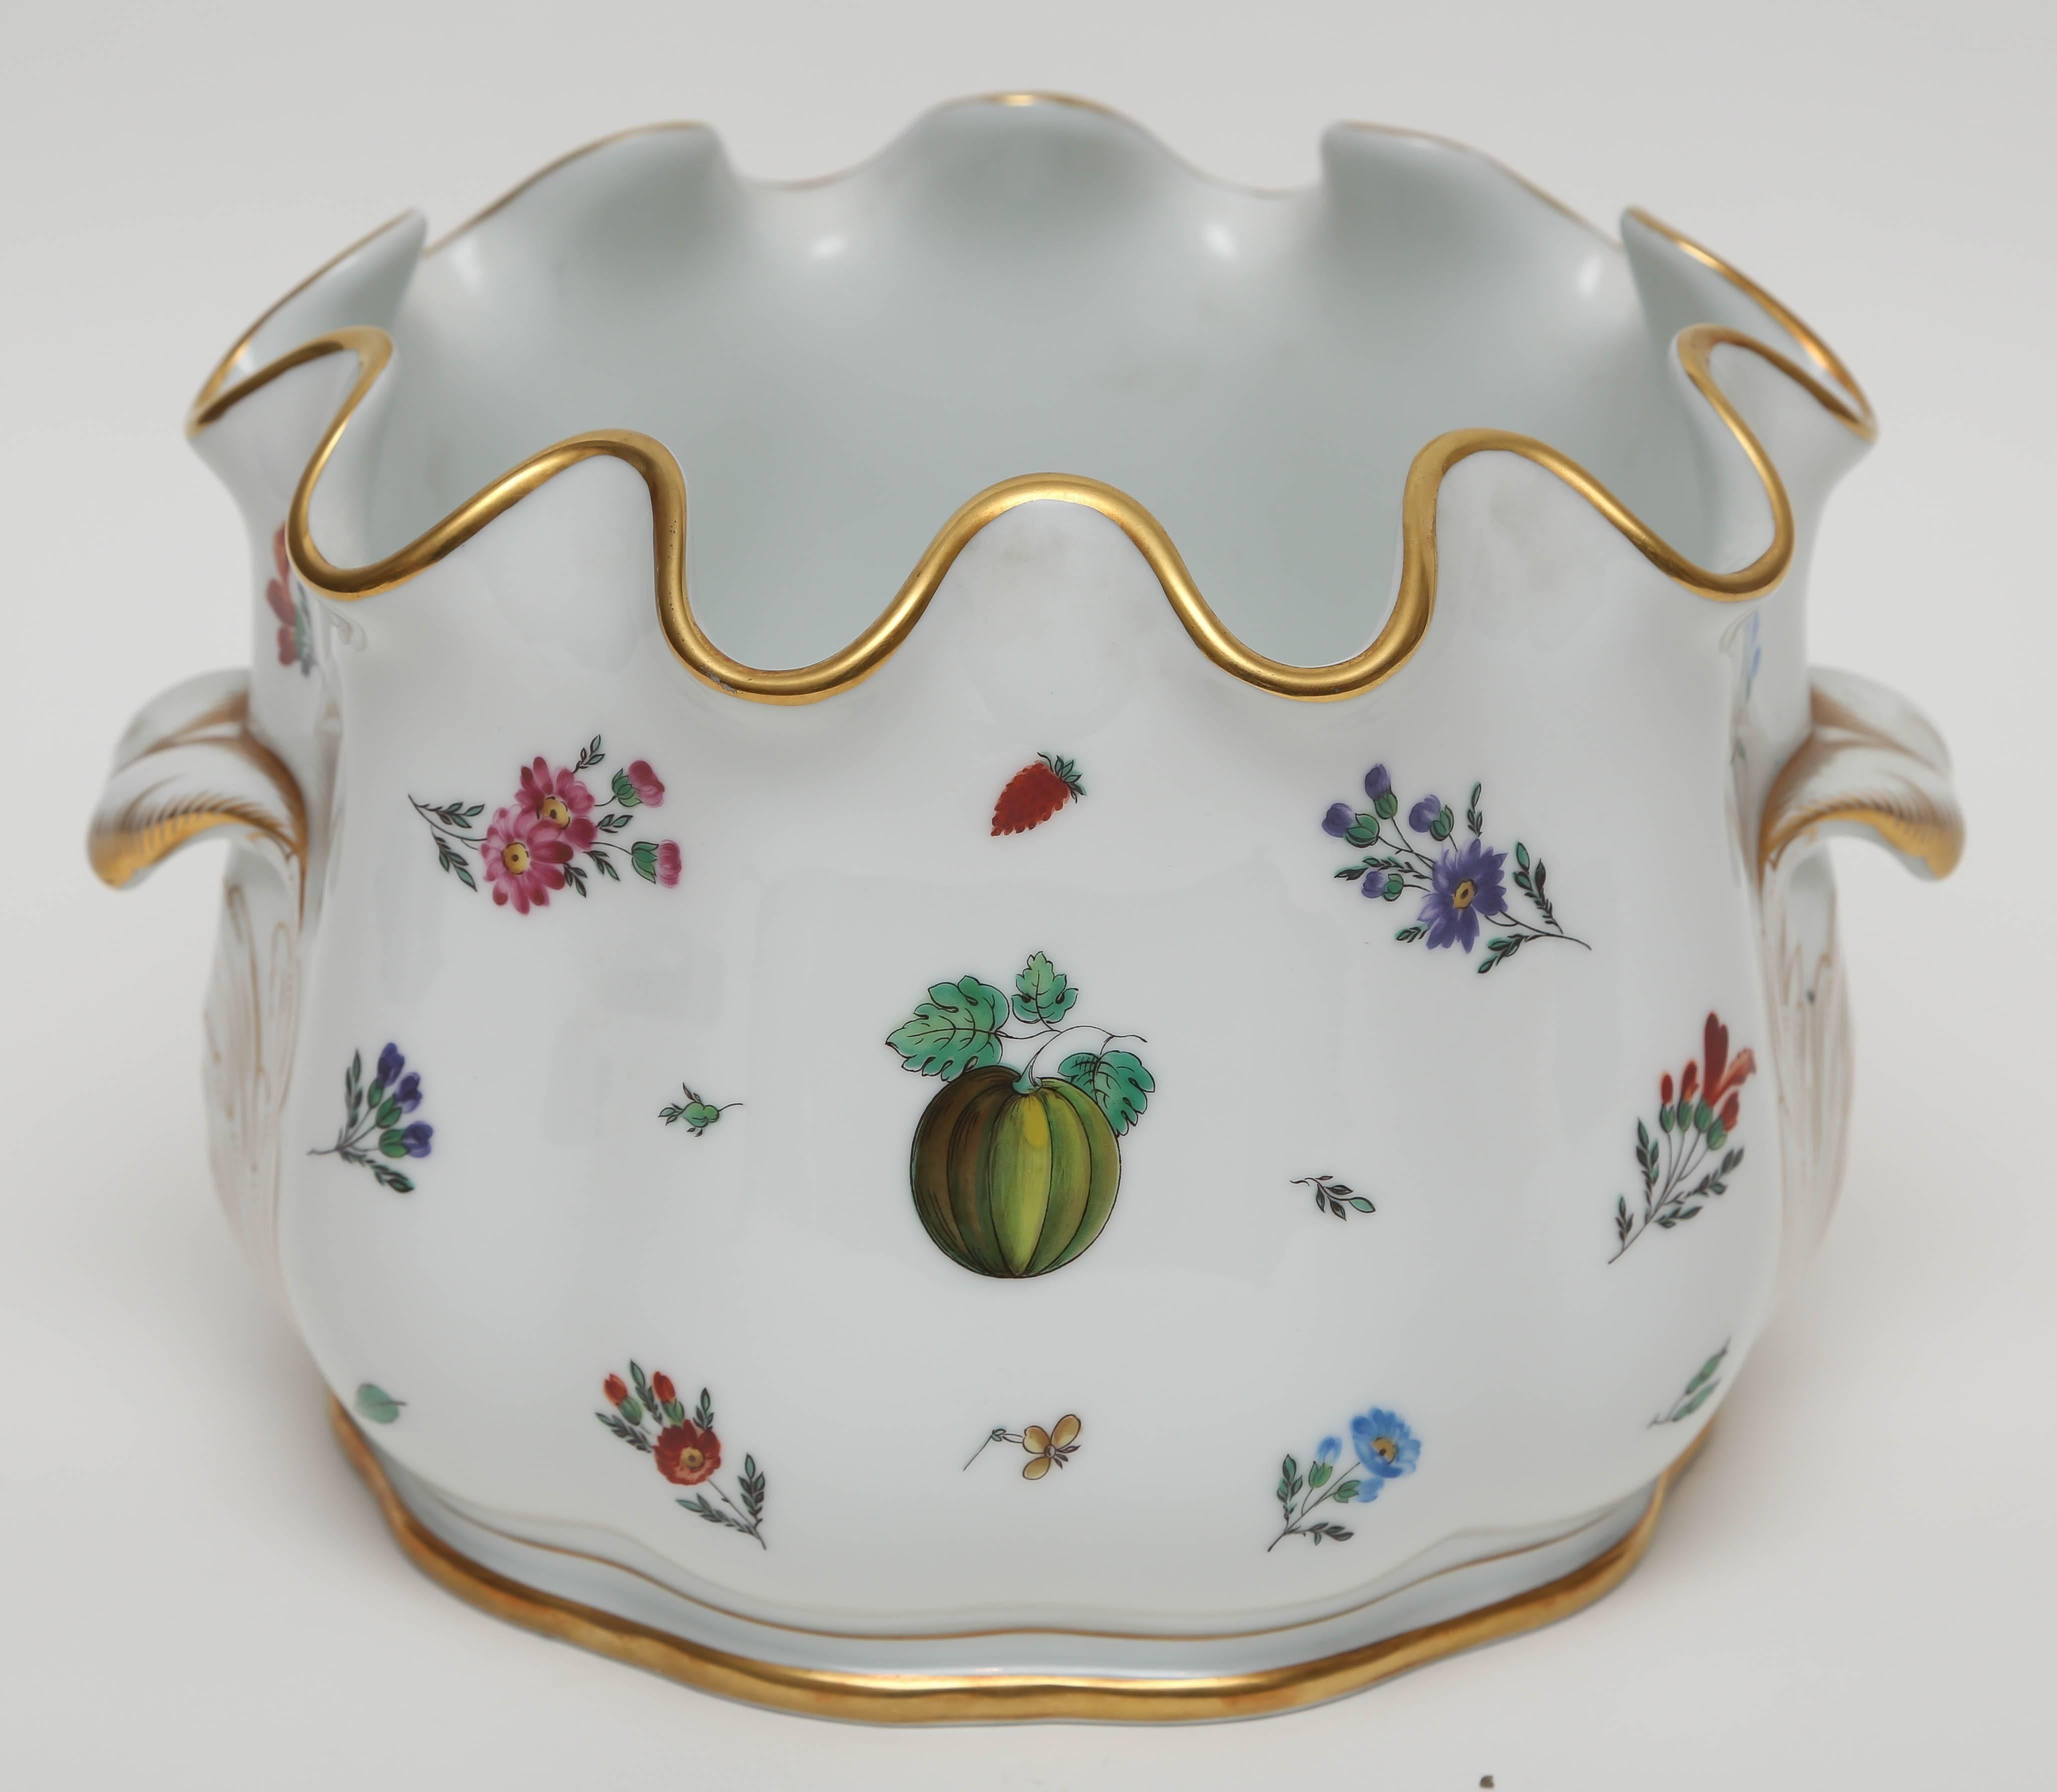 A fine bone china decorative and pretty piece by the re known Italian porcelain firm of Ginori. A nicely scalloped shape, hand-painted botanicals and 24-karat gilt trim highlight this piece. Impressive in size and could also be used for a